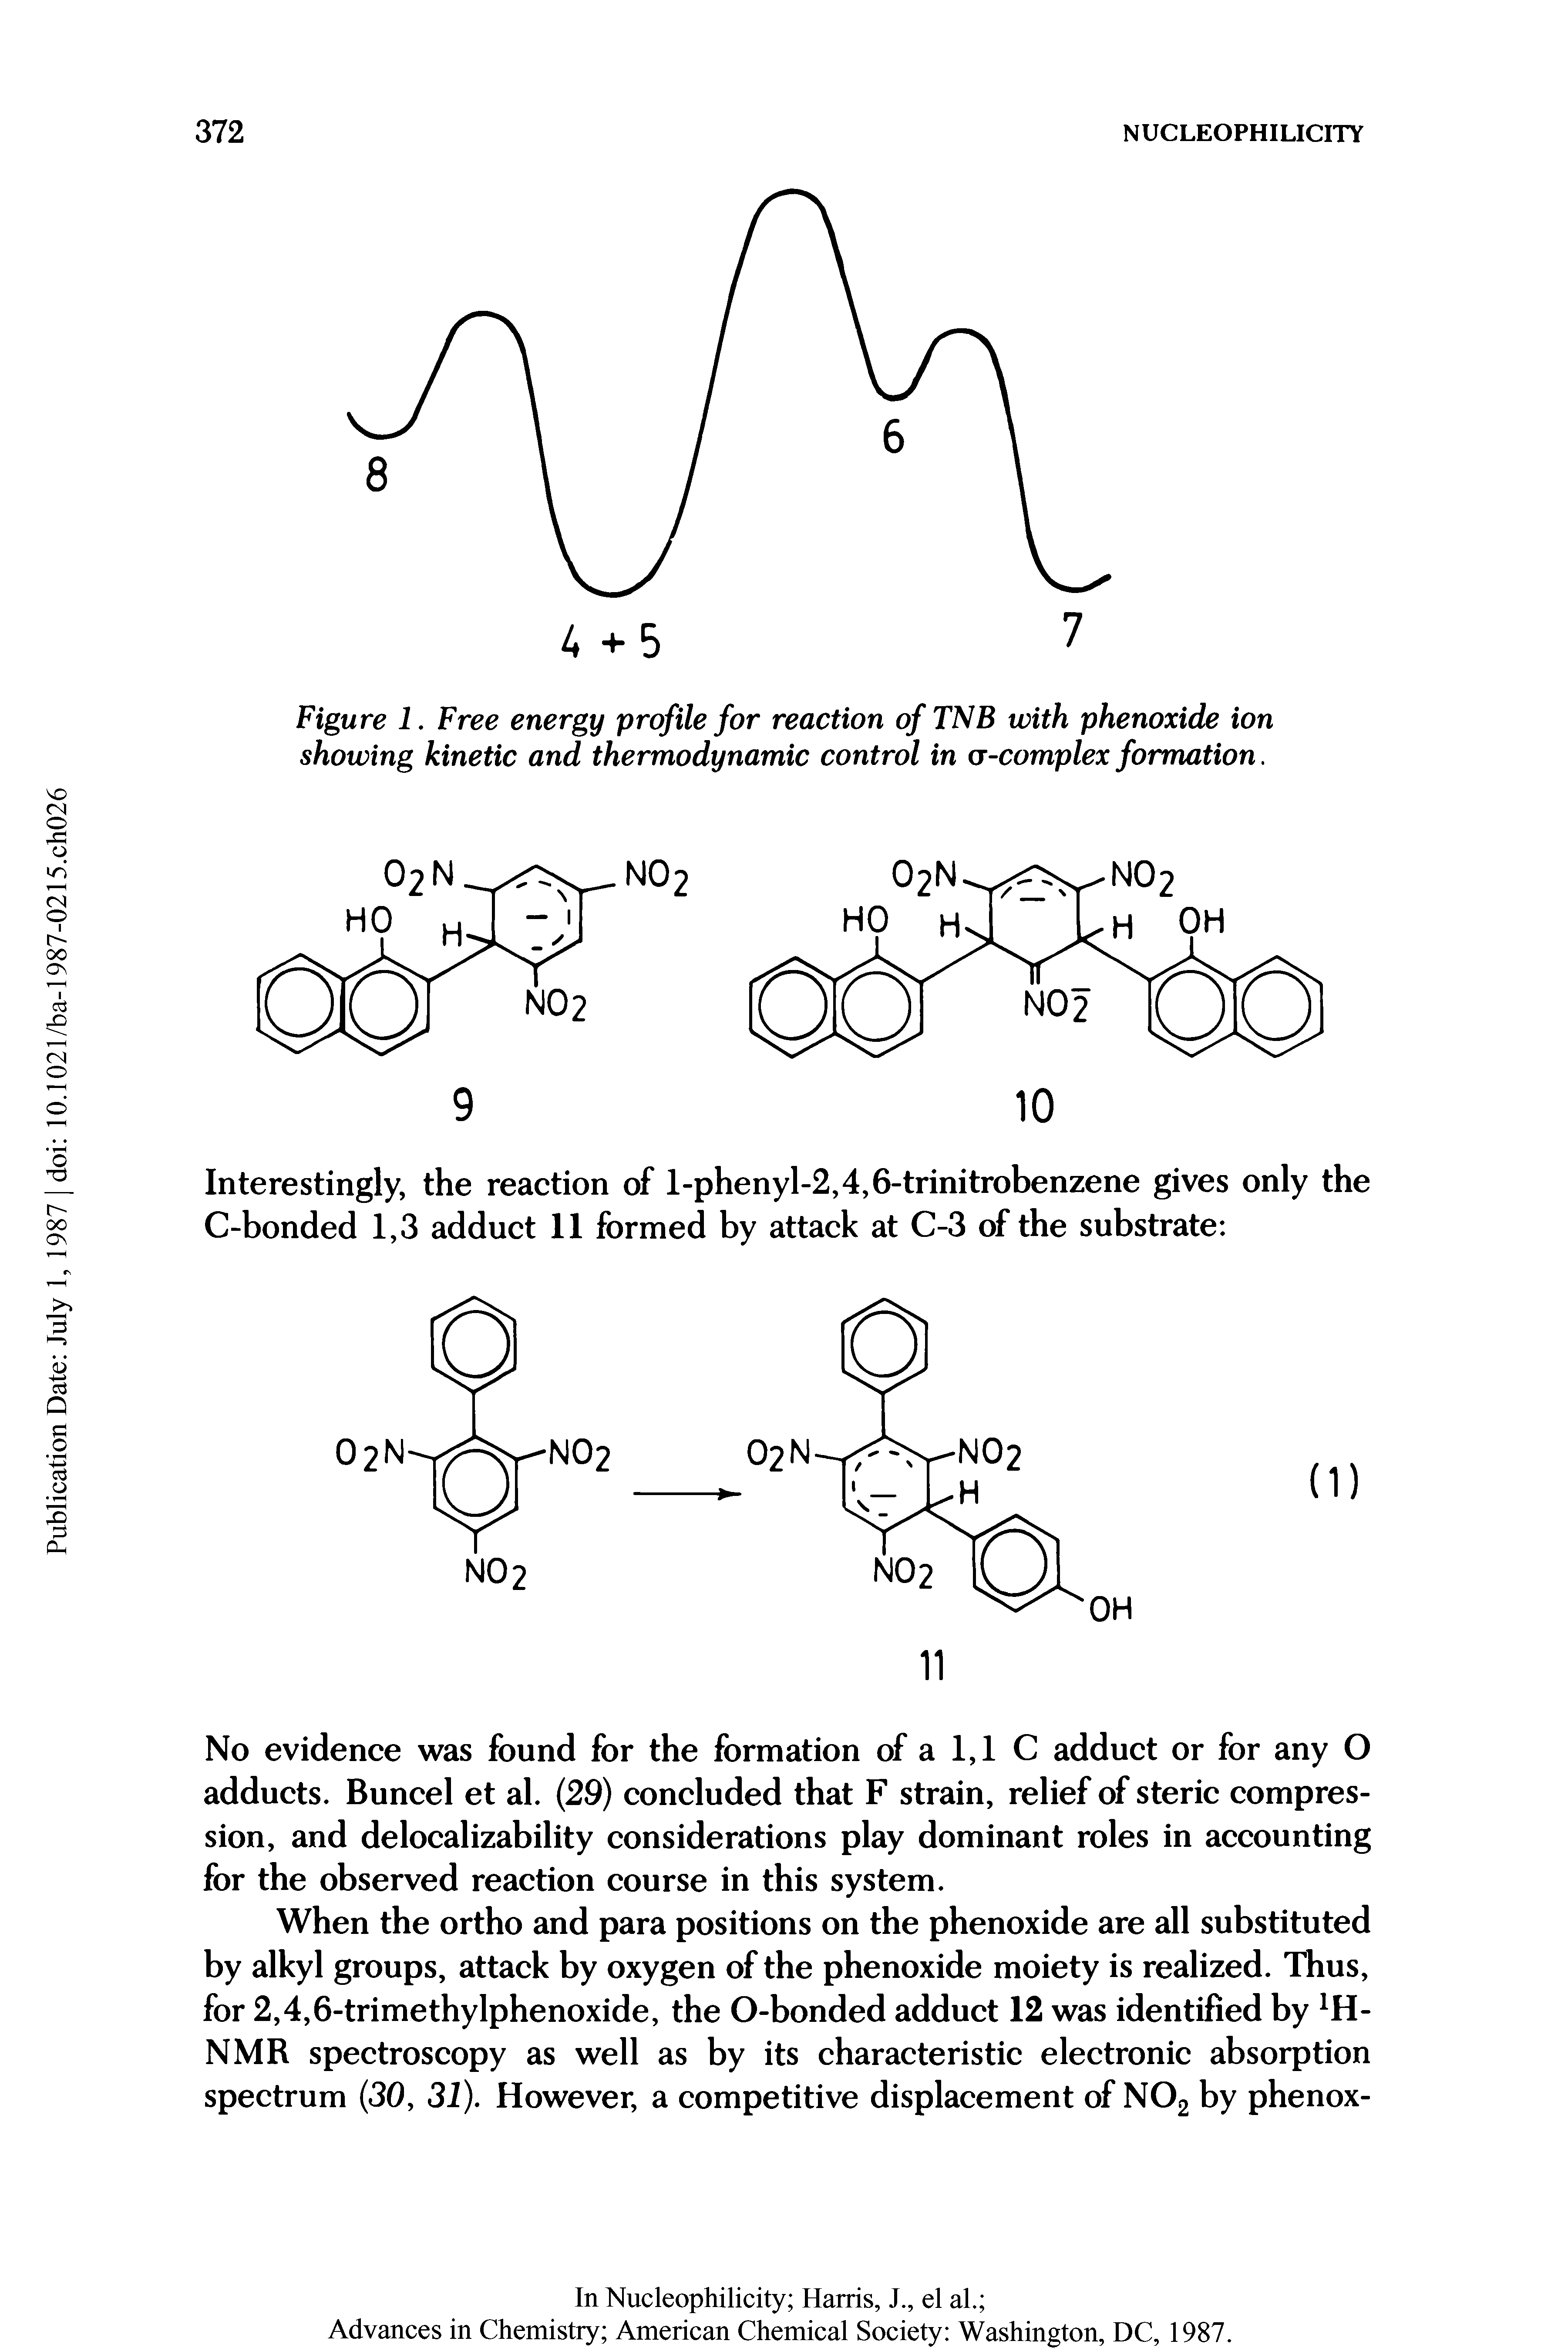 Figure 1. Free energy profile for reaction ofTNB with phenoxide ion showing kinetic and thermodynamic control in a-complex formation.